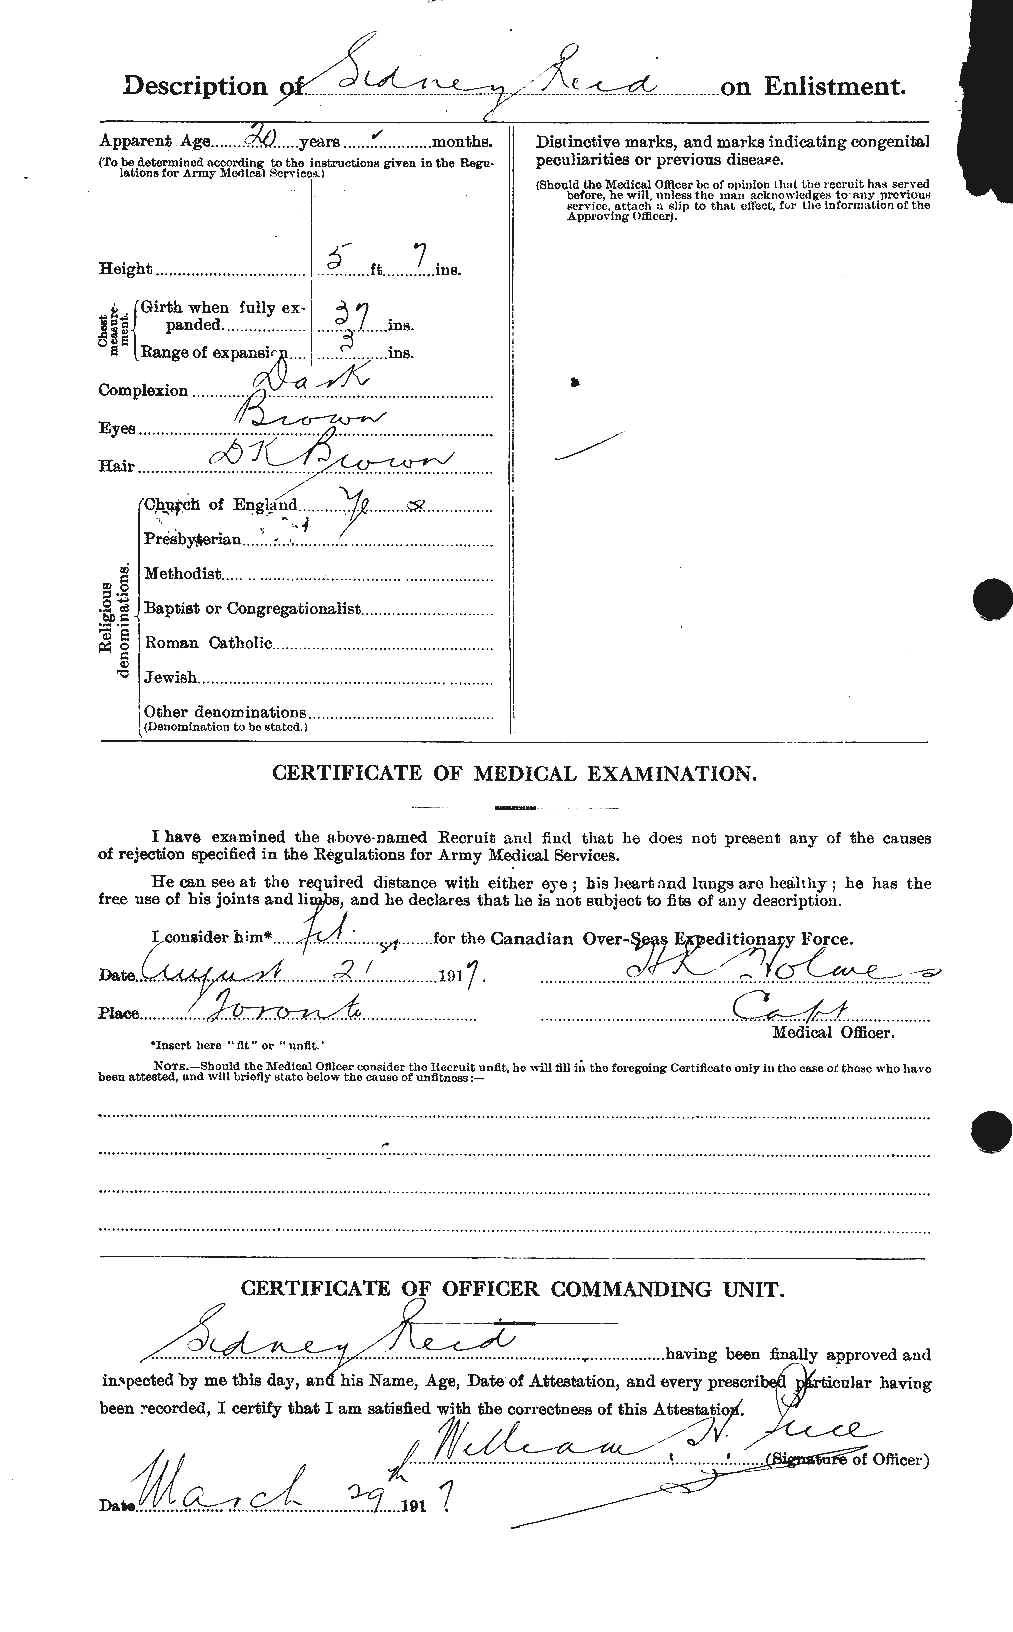 Personnel Records of the First World War - CEF 601958b